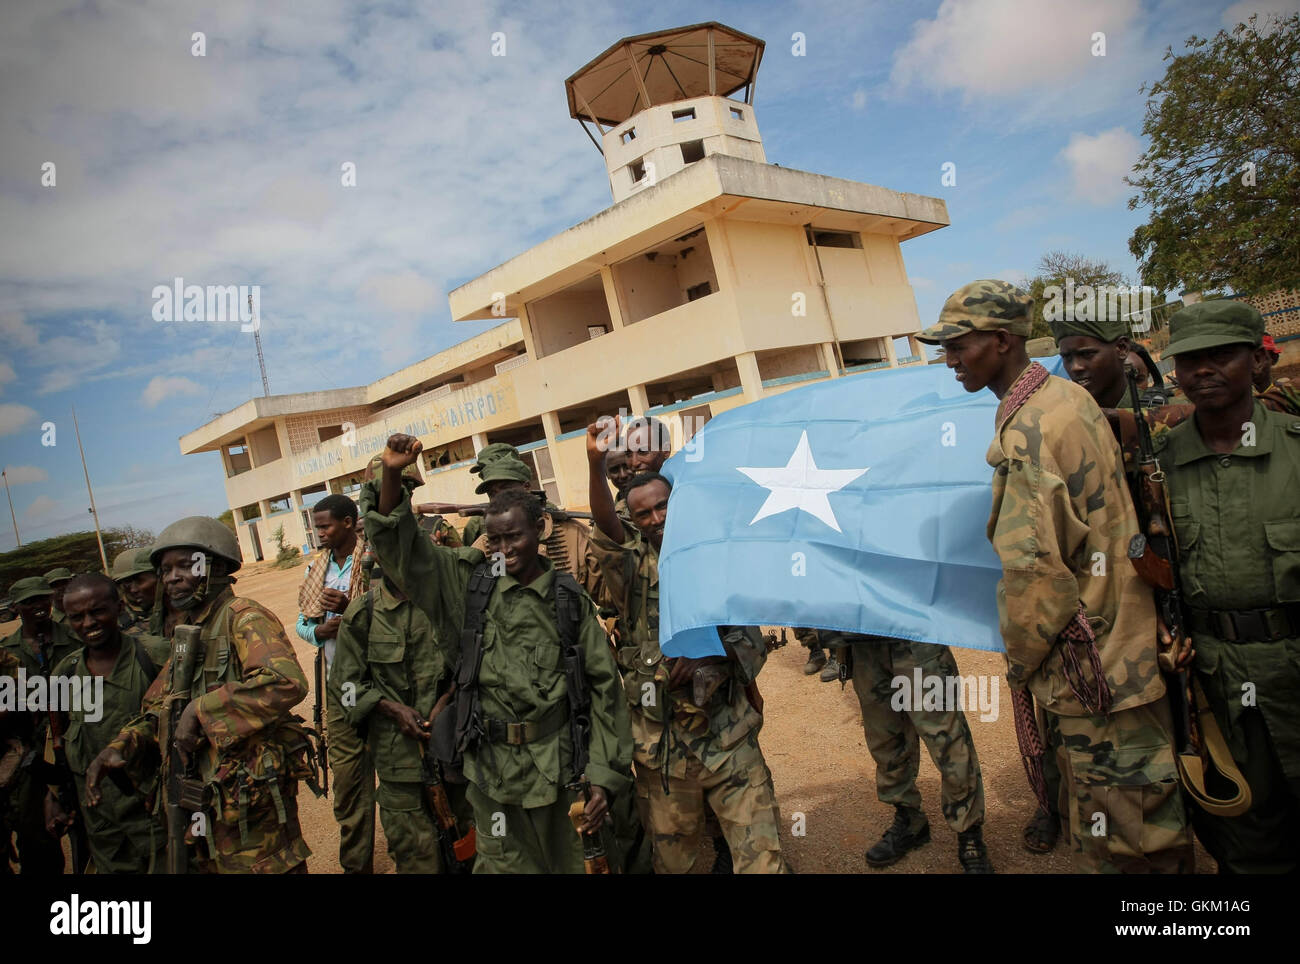 SOMALIA, Kismayo: In a handout photograph released by the African Union-United Nations Information Support Team 02 October, members of the Somali National Army and the government-allied Ras Kimboni militia display the Somali national flag while they celebrate the capture of Kismayo Airport after Kenyan AMISOM troops moved into and through Kismayo, the hitherto last major urban stronghold of the Al-Qaeda-affiliated extremist group Al Shabaab, on their way to the airport without a shot being fired following a two-month operation to liberate towns and villages across southern Somalia and Kismayo  Stock Photo